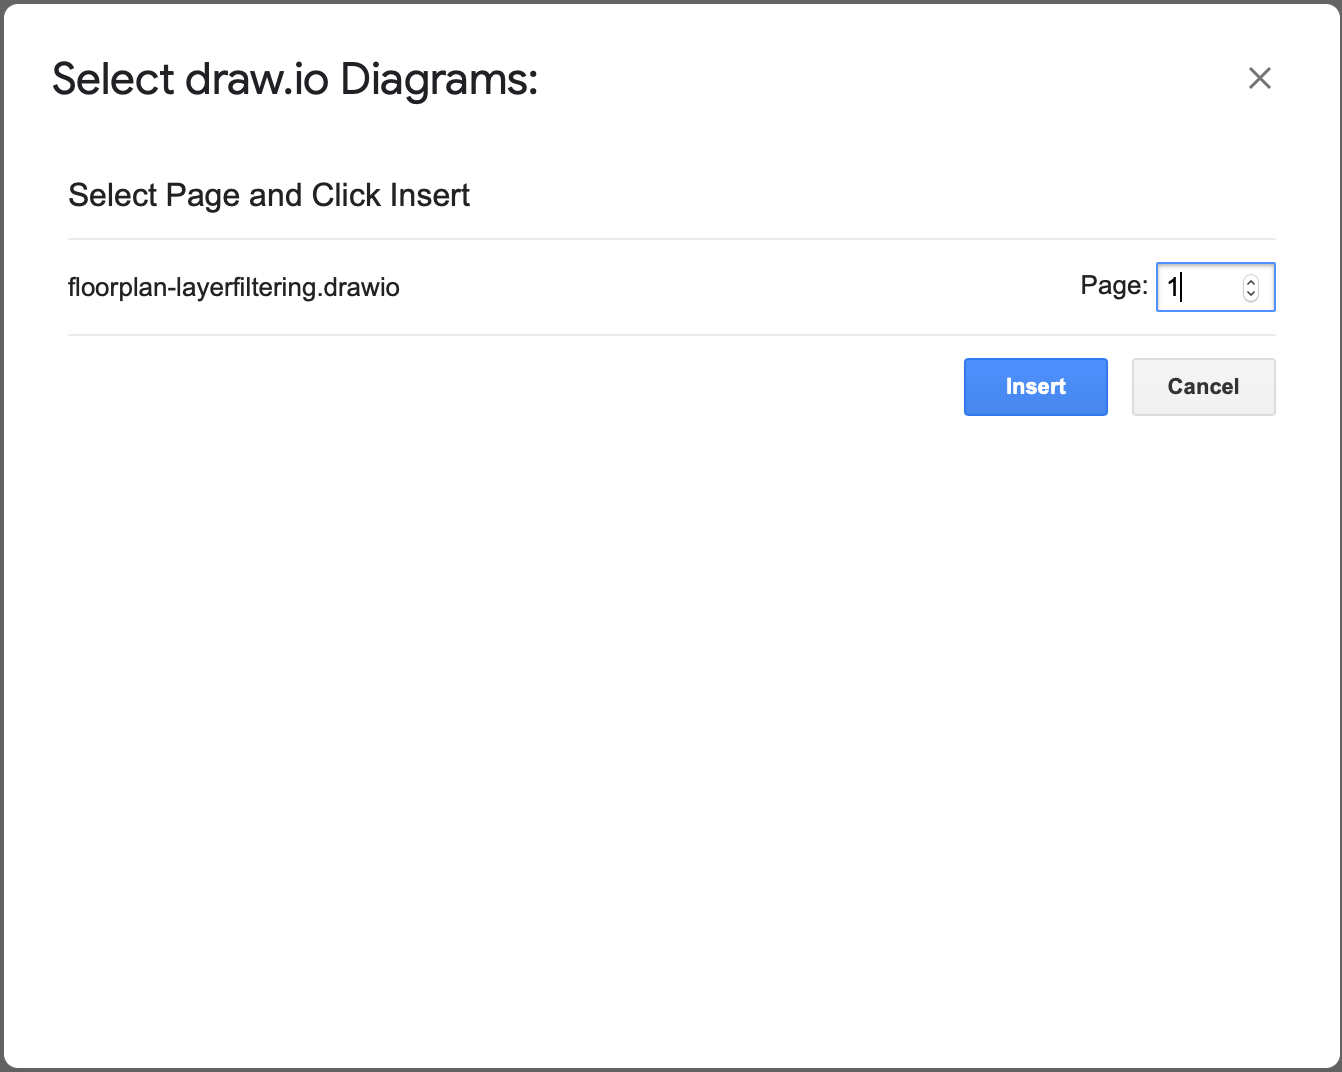 Select the diagram page you want to display in your Google Doc, if it is a multi-page diagram